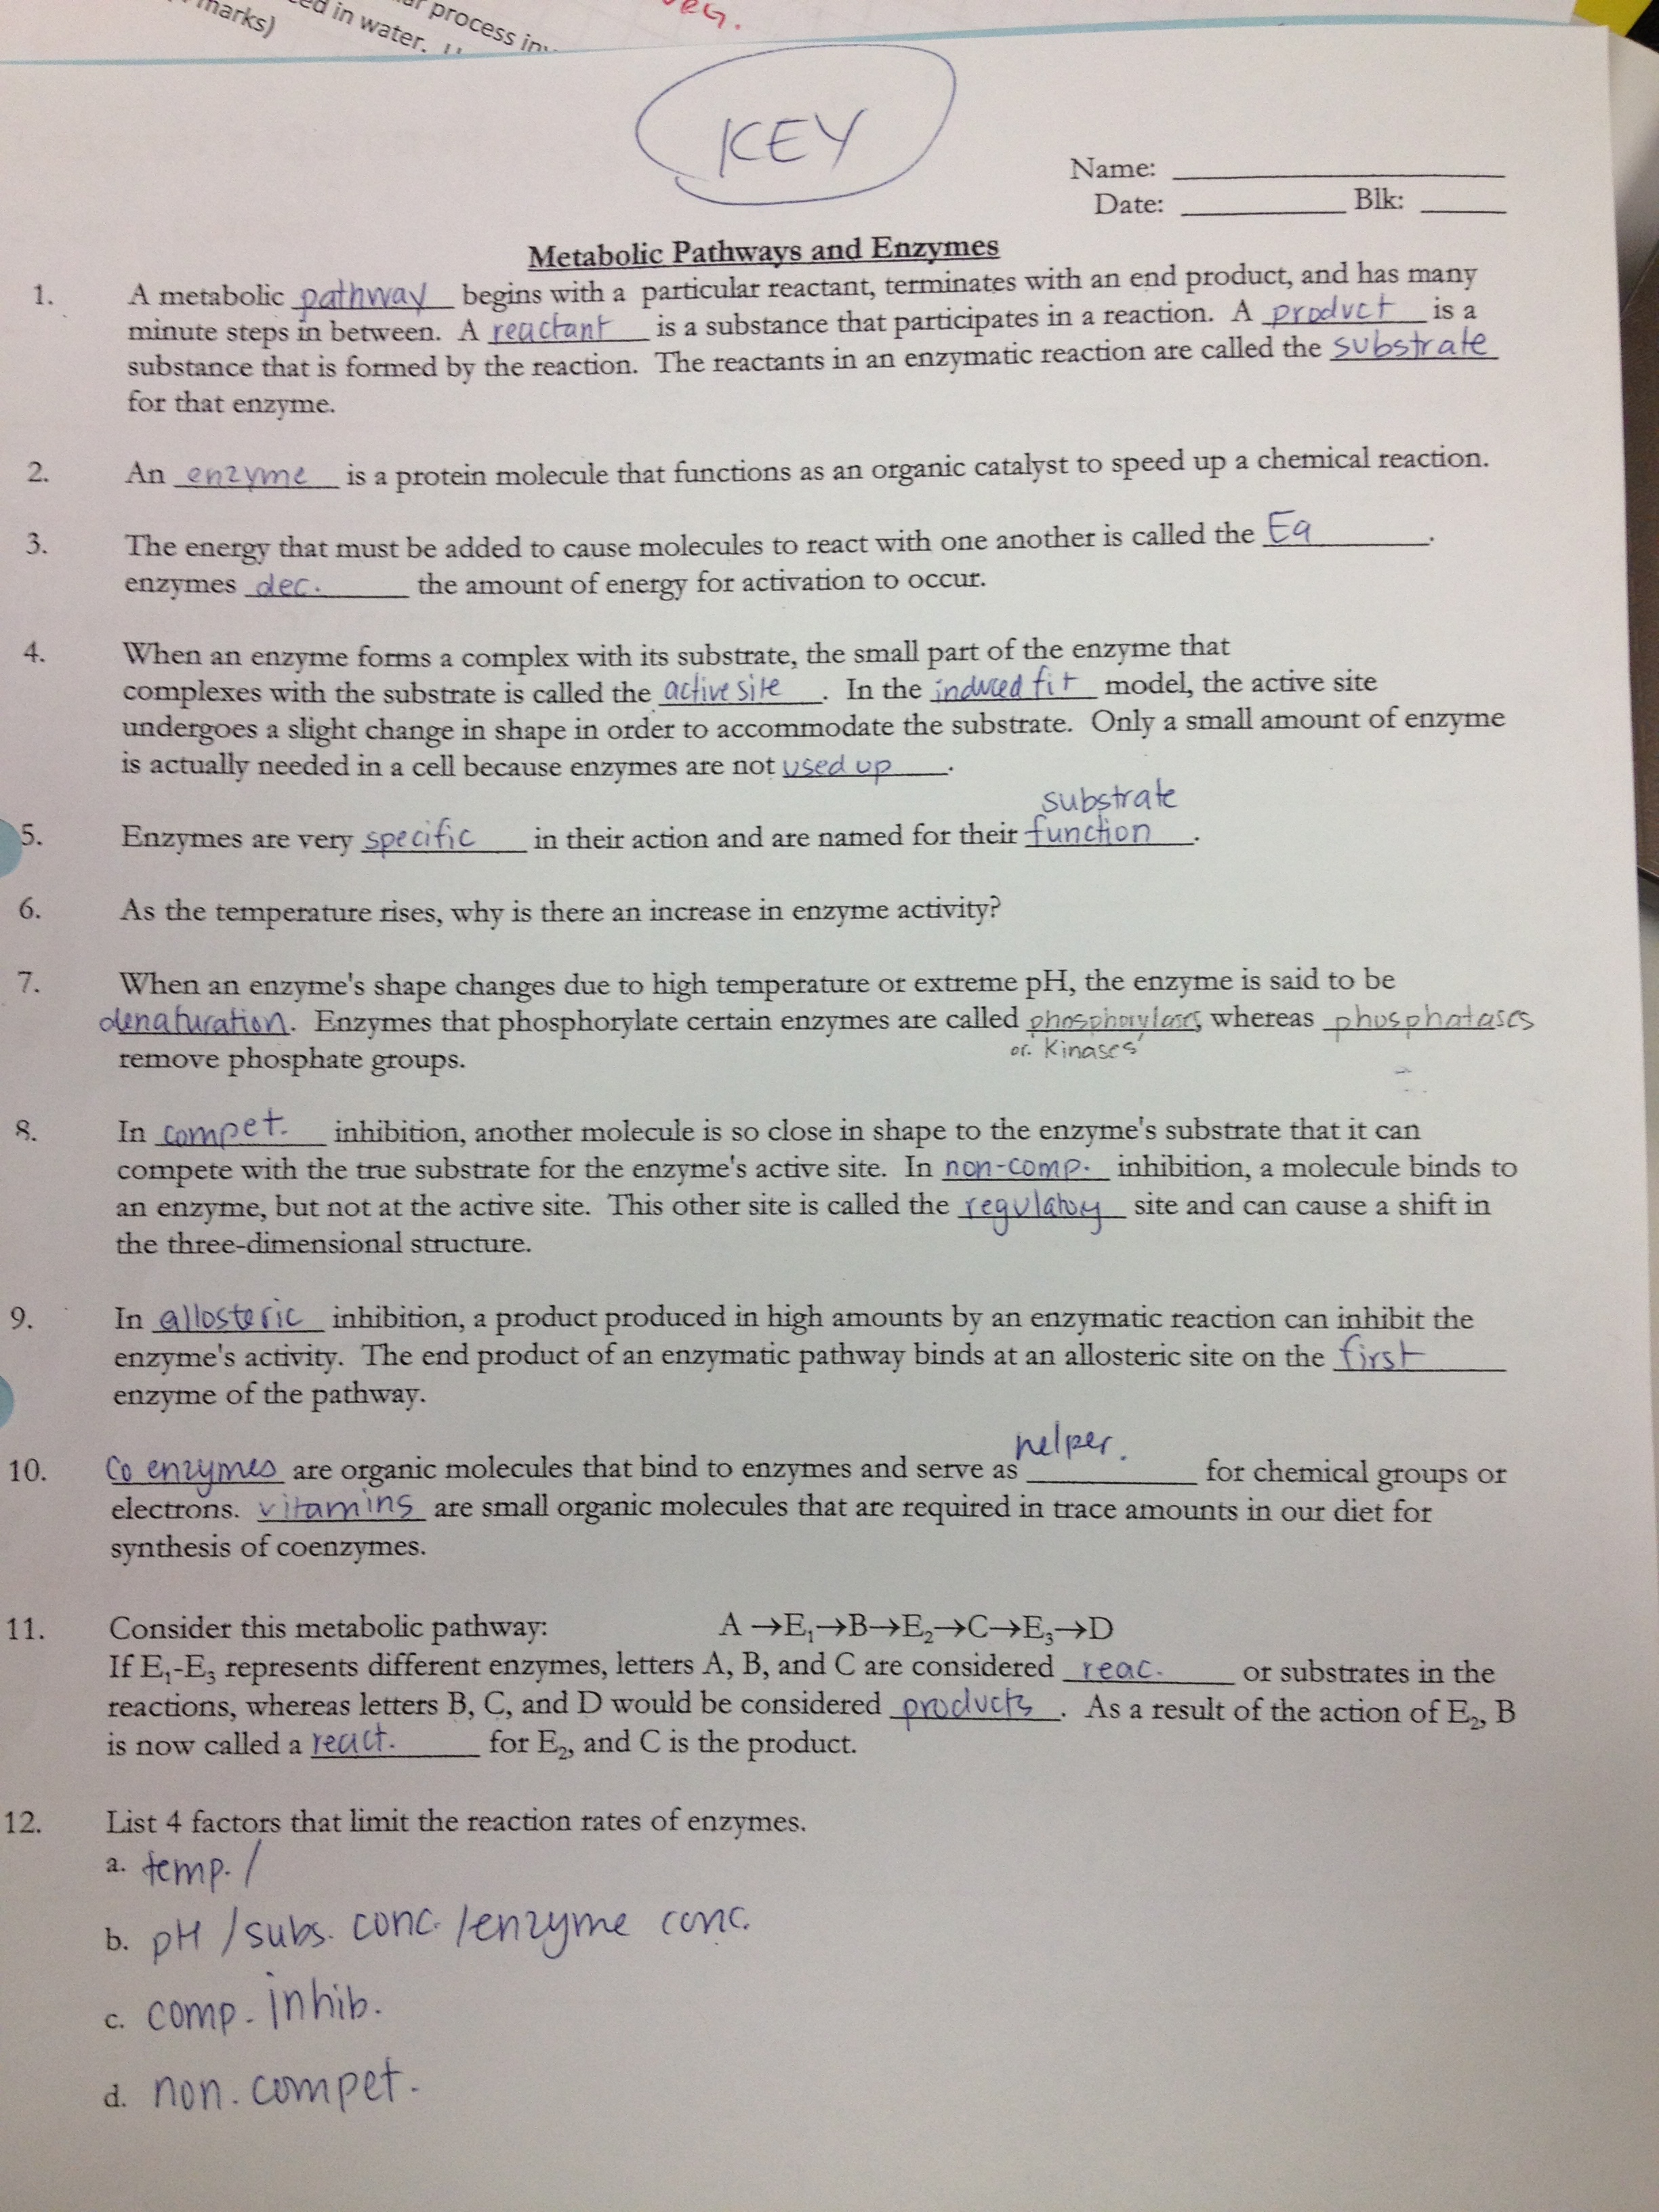 Enzyme Worksheet Answers  Ms. Ghtaura